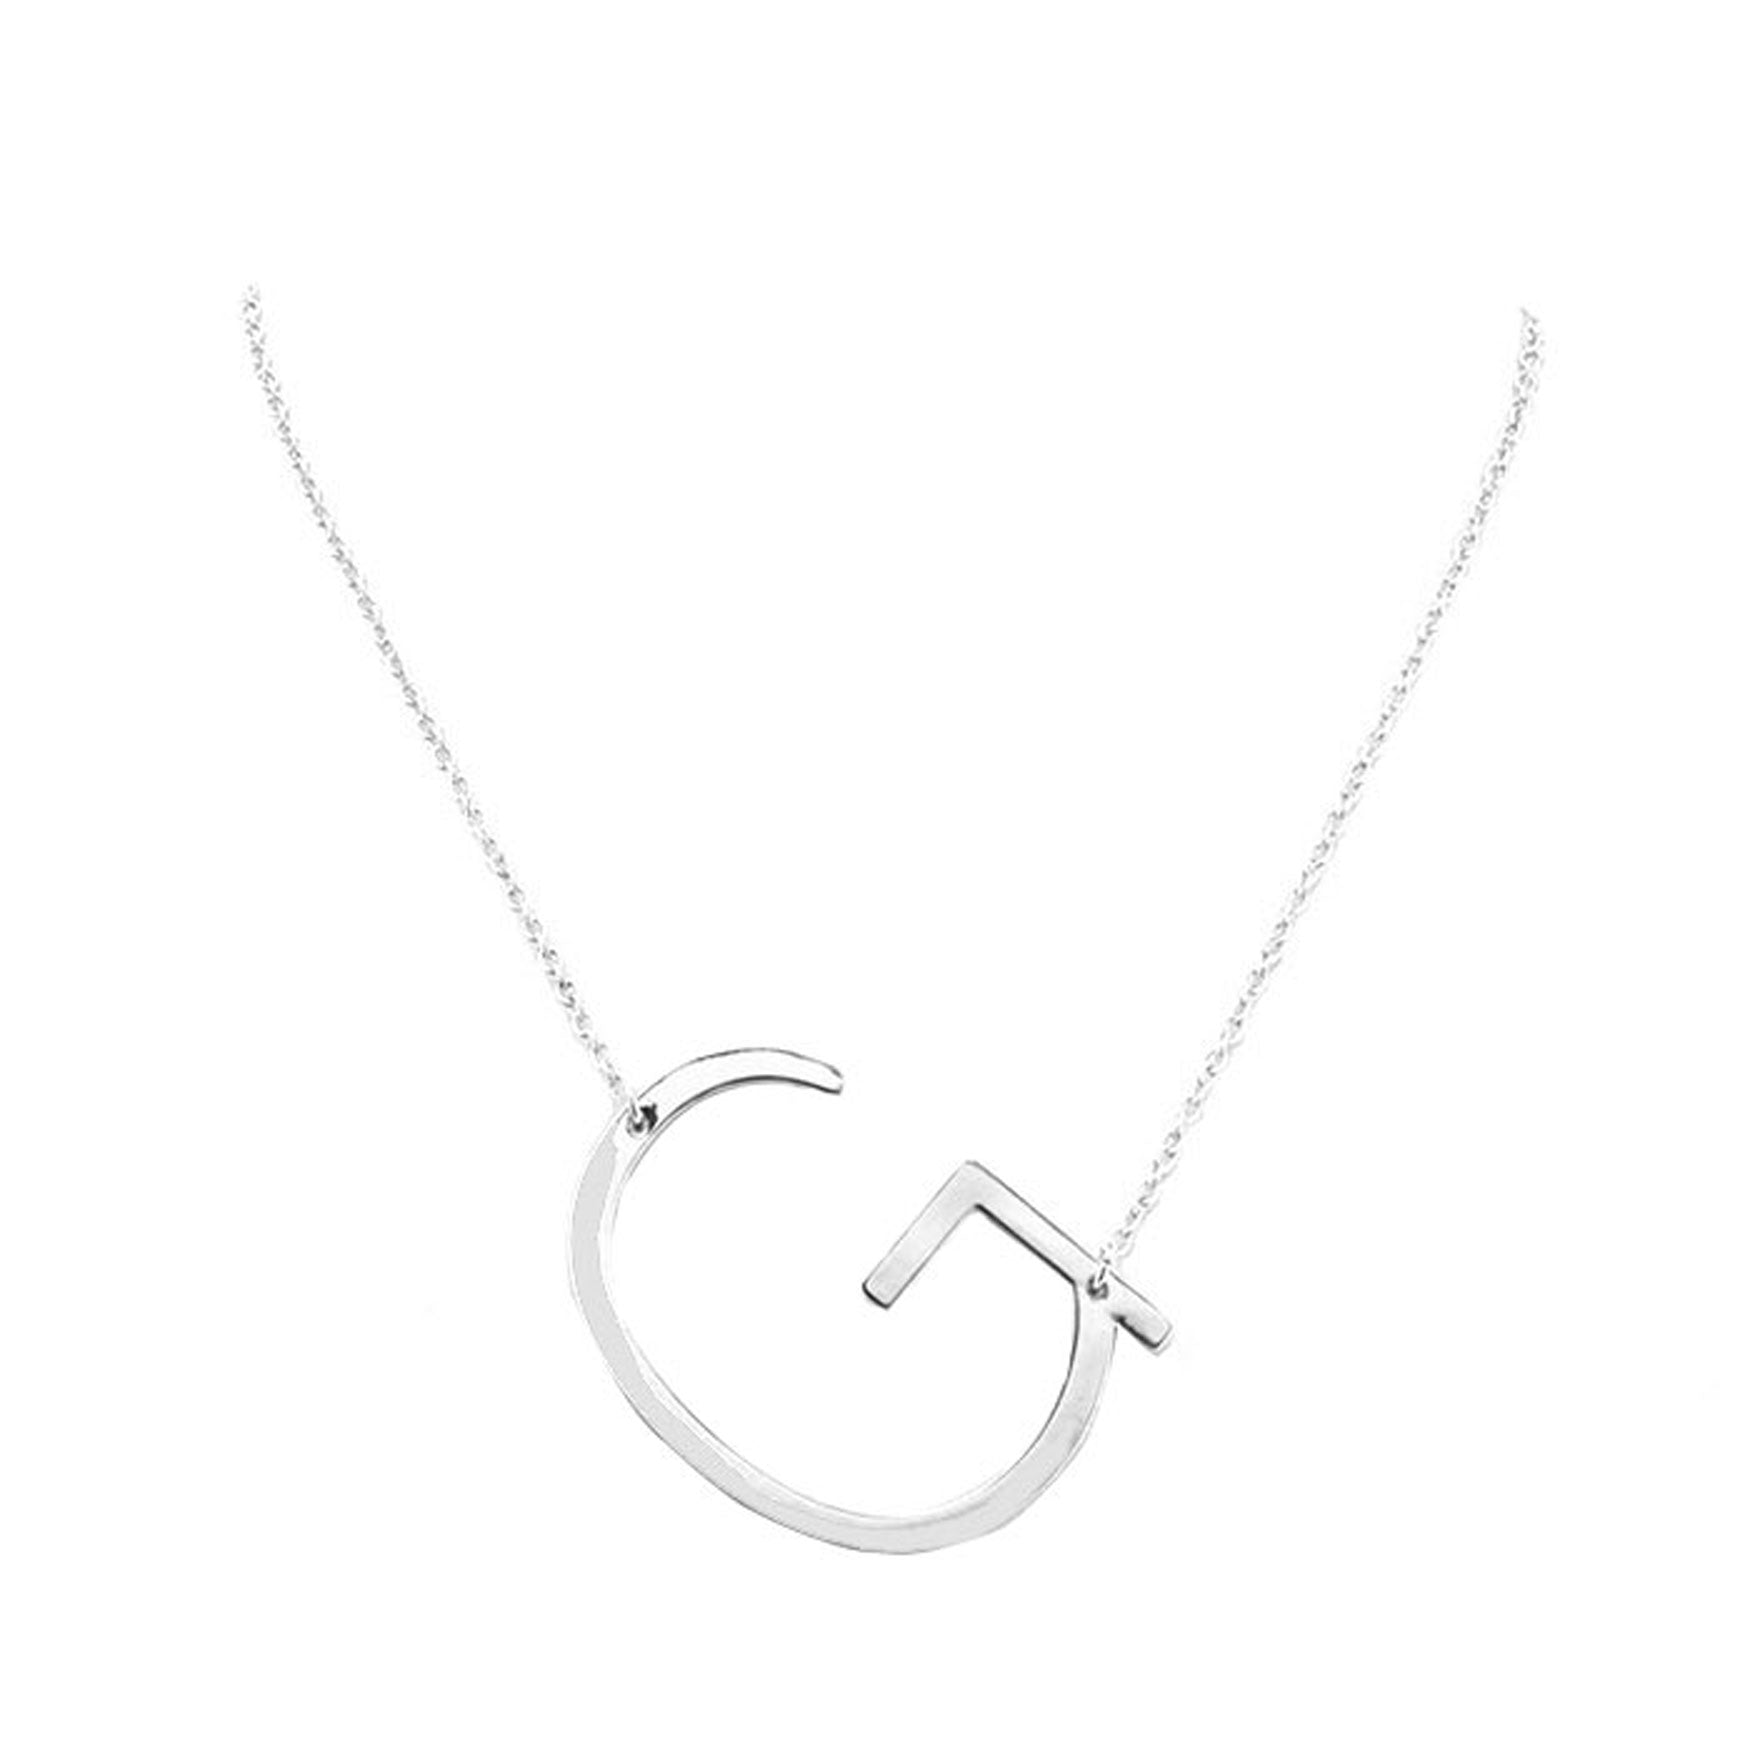 Silver G Monogram Metal Pendant Necklace. Beautifully crafted design adds a gorgeous glow to any outfit. Jewelry that fits your lifestyle! Perfect Birthday Gift, Anniversary Gift, Mother's Day Gift